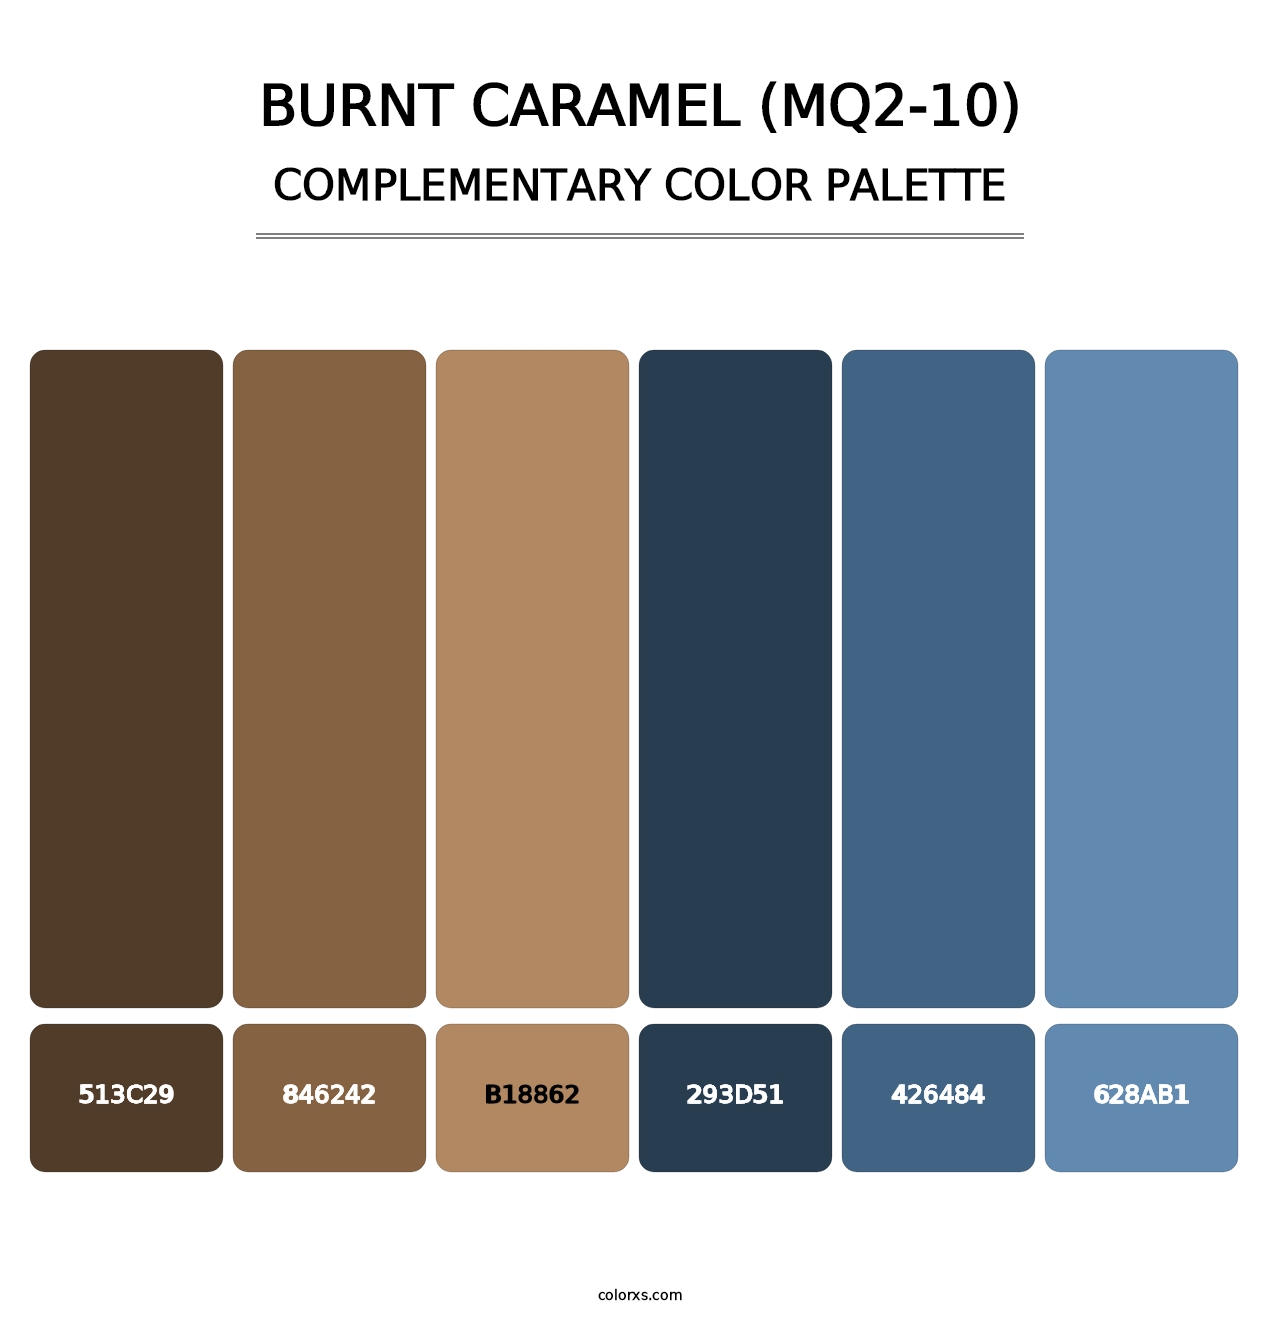 Burnt Caramel (MQ2-10) - Complementary Color Palette